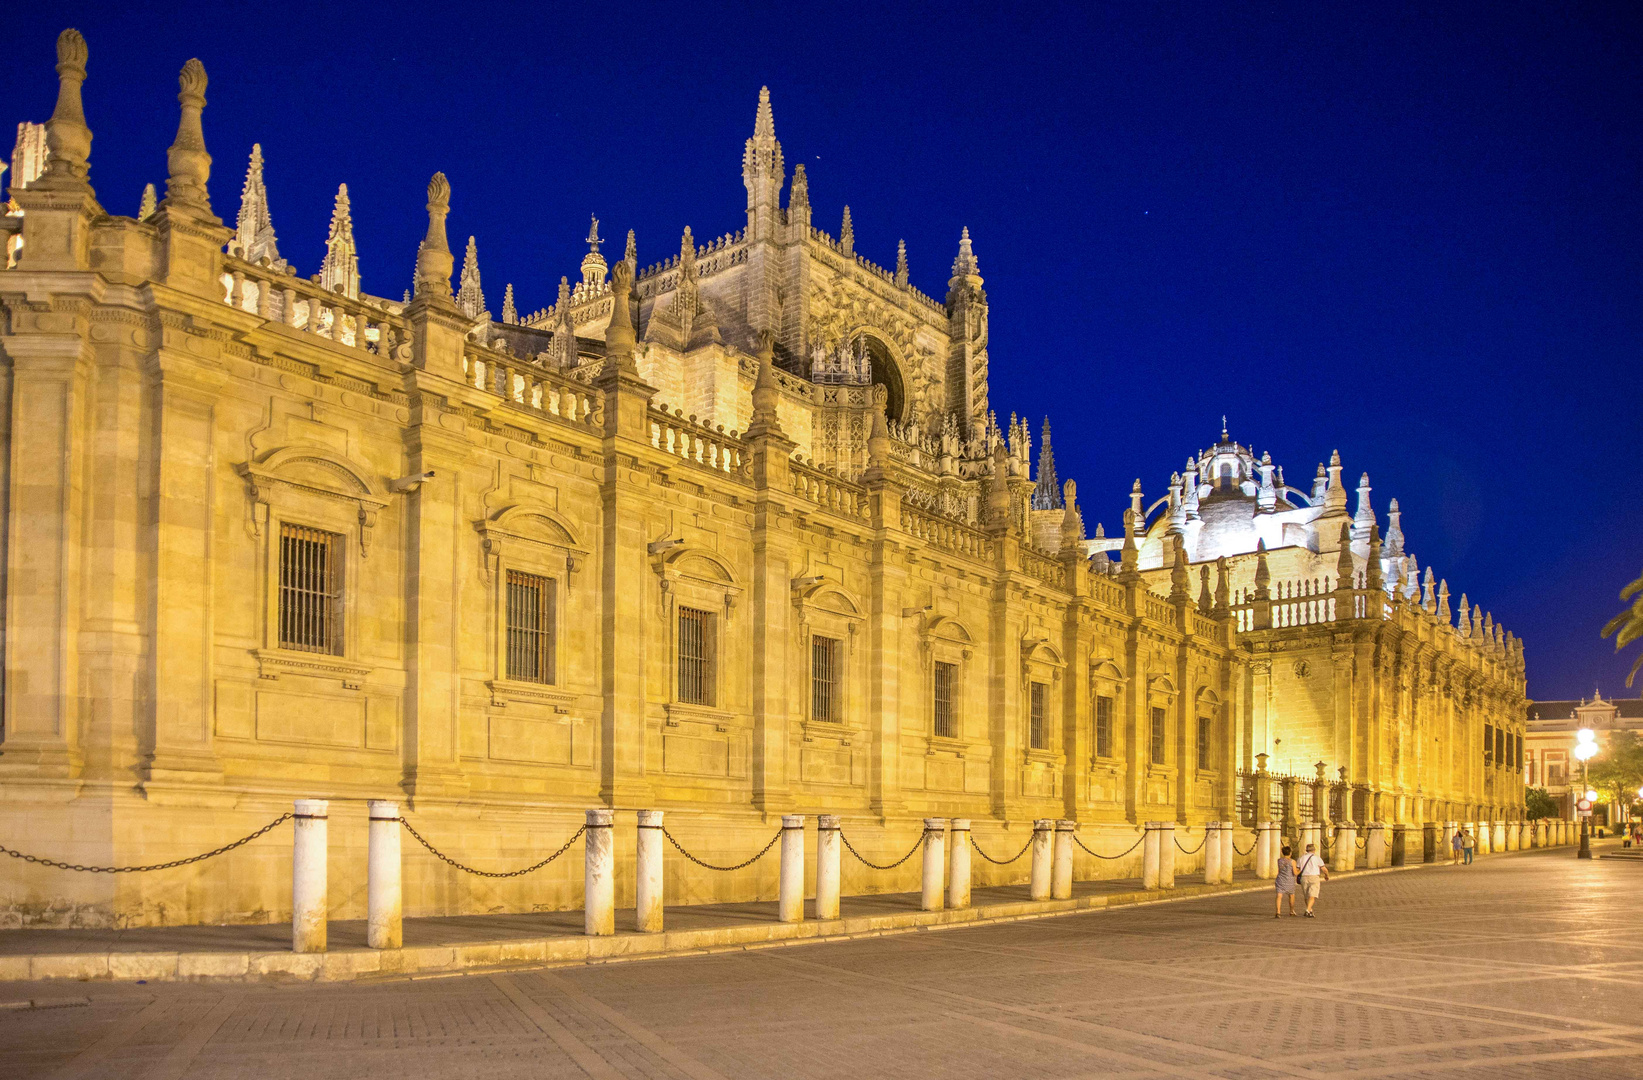 Along the Cathedral of Seville